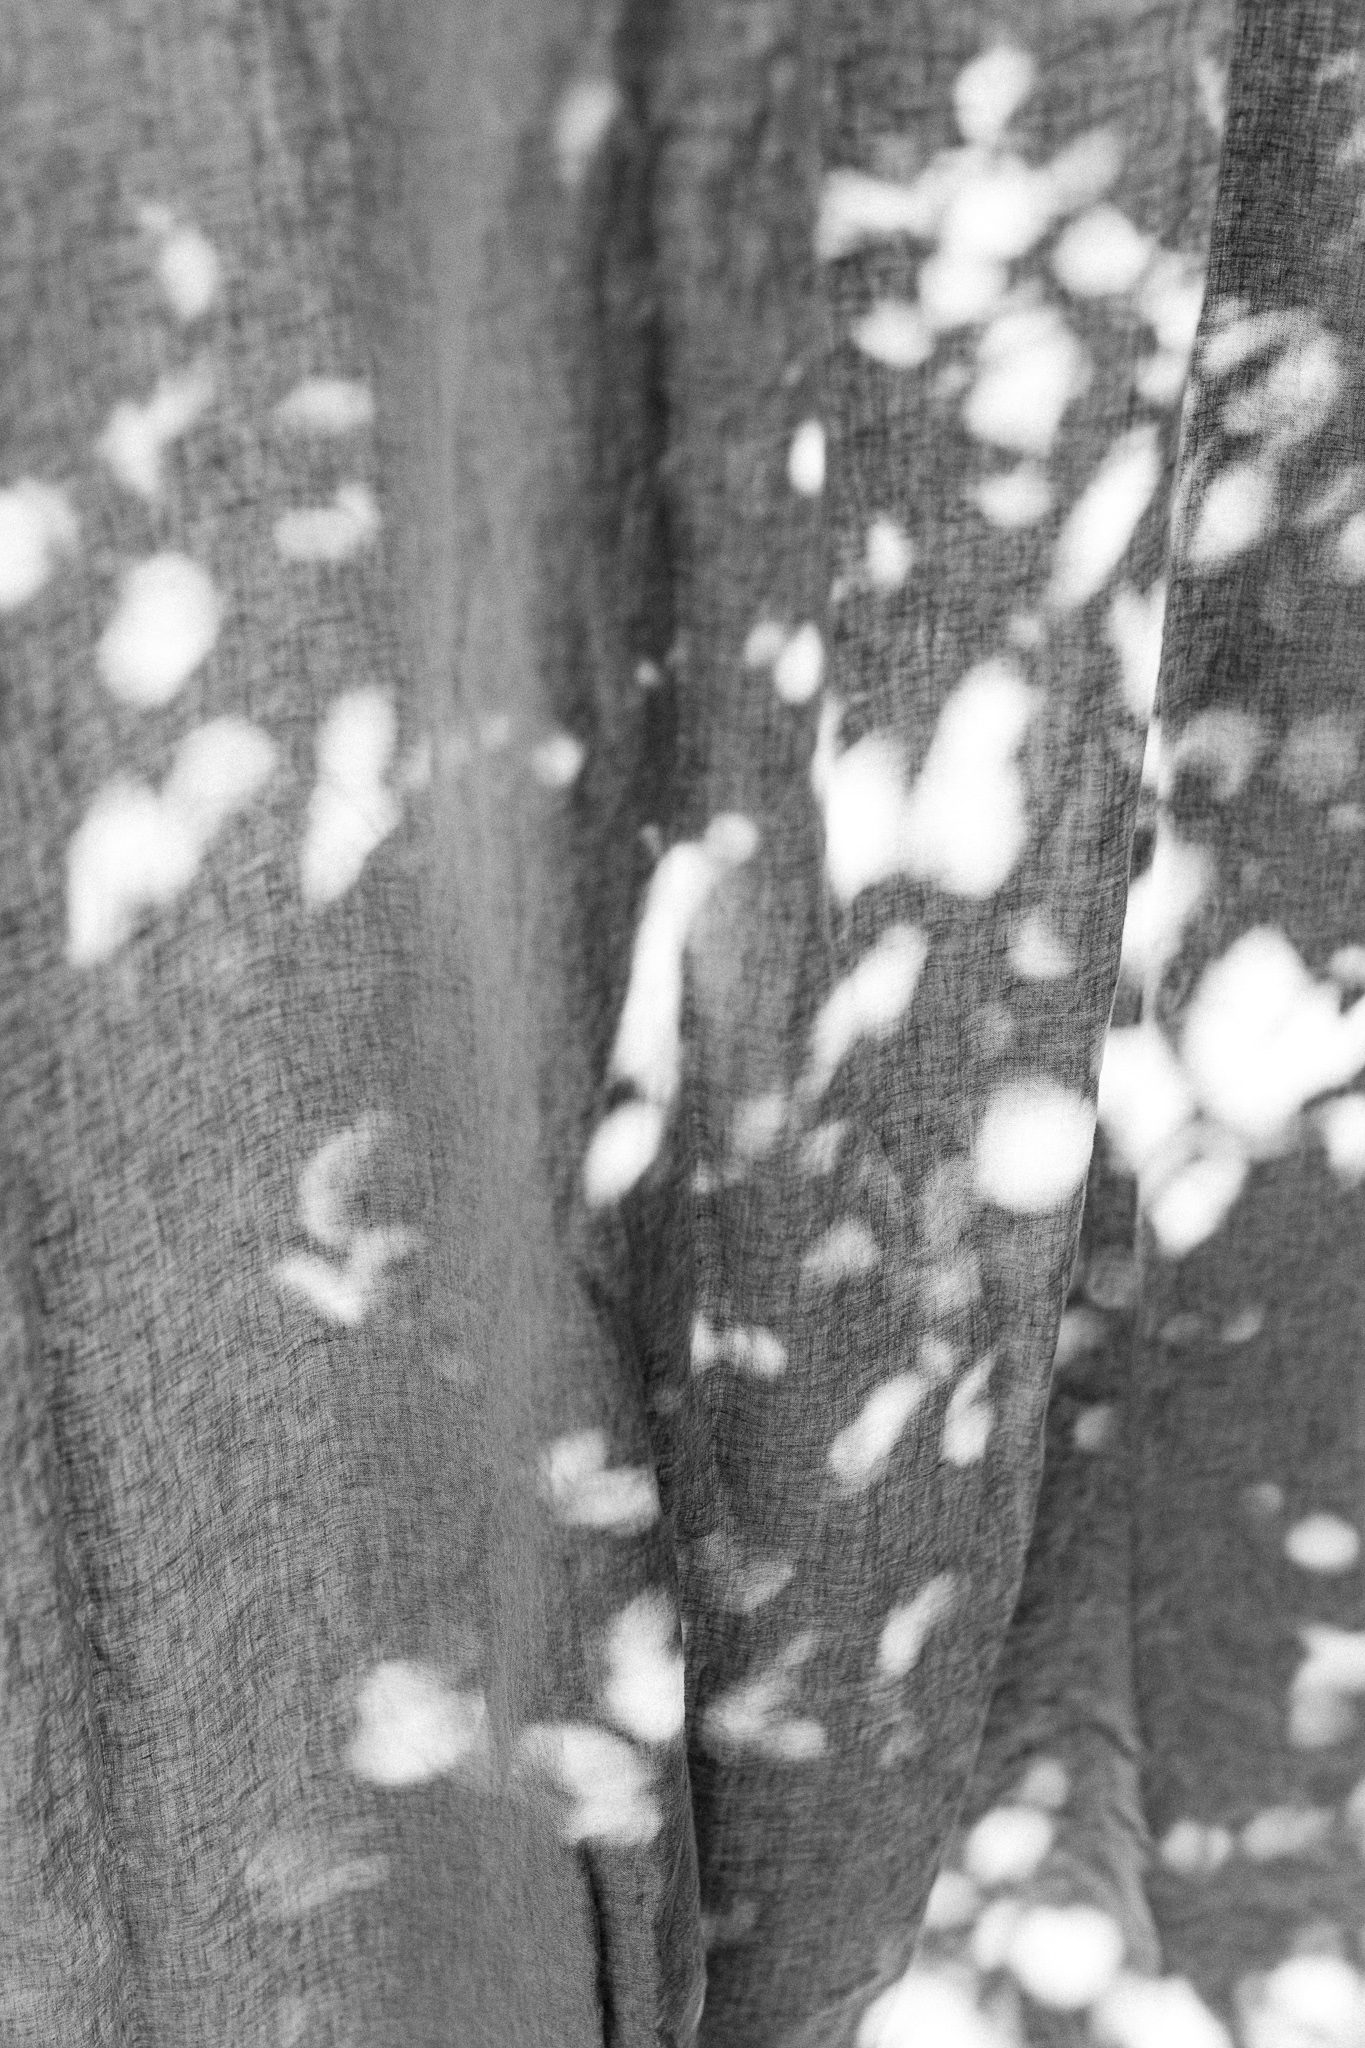 Black and white image of curtain